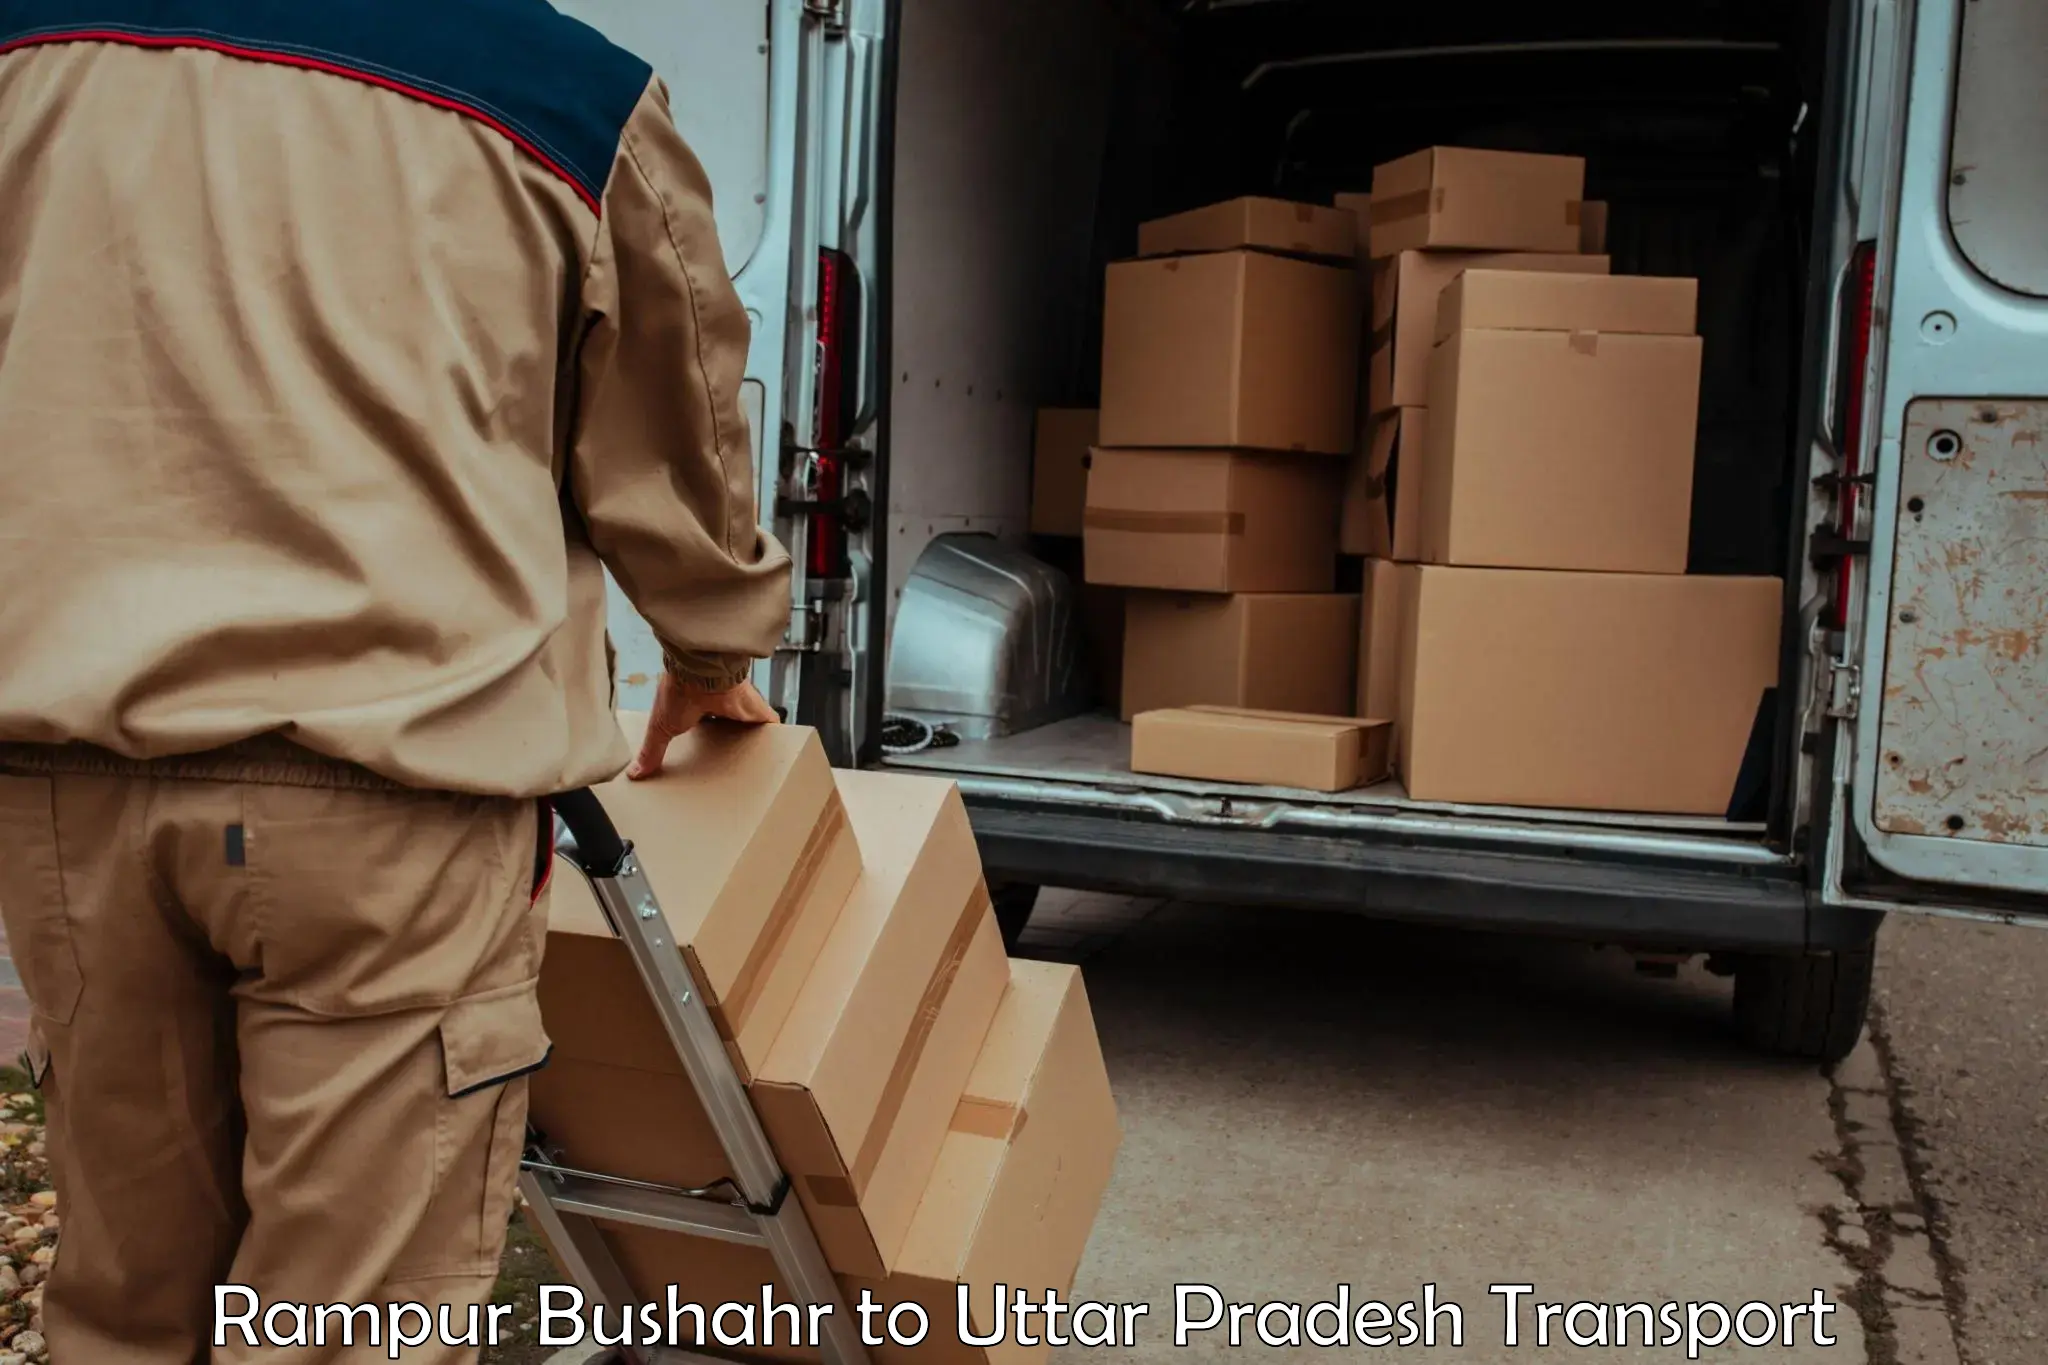 Commercial transport service Rampur Bushahr to Bhathat